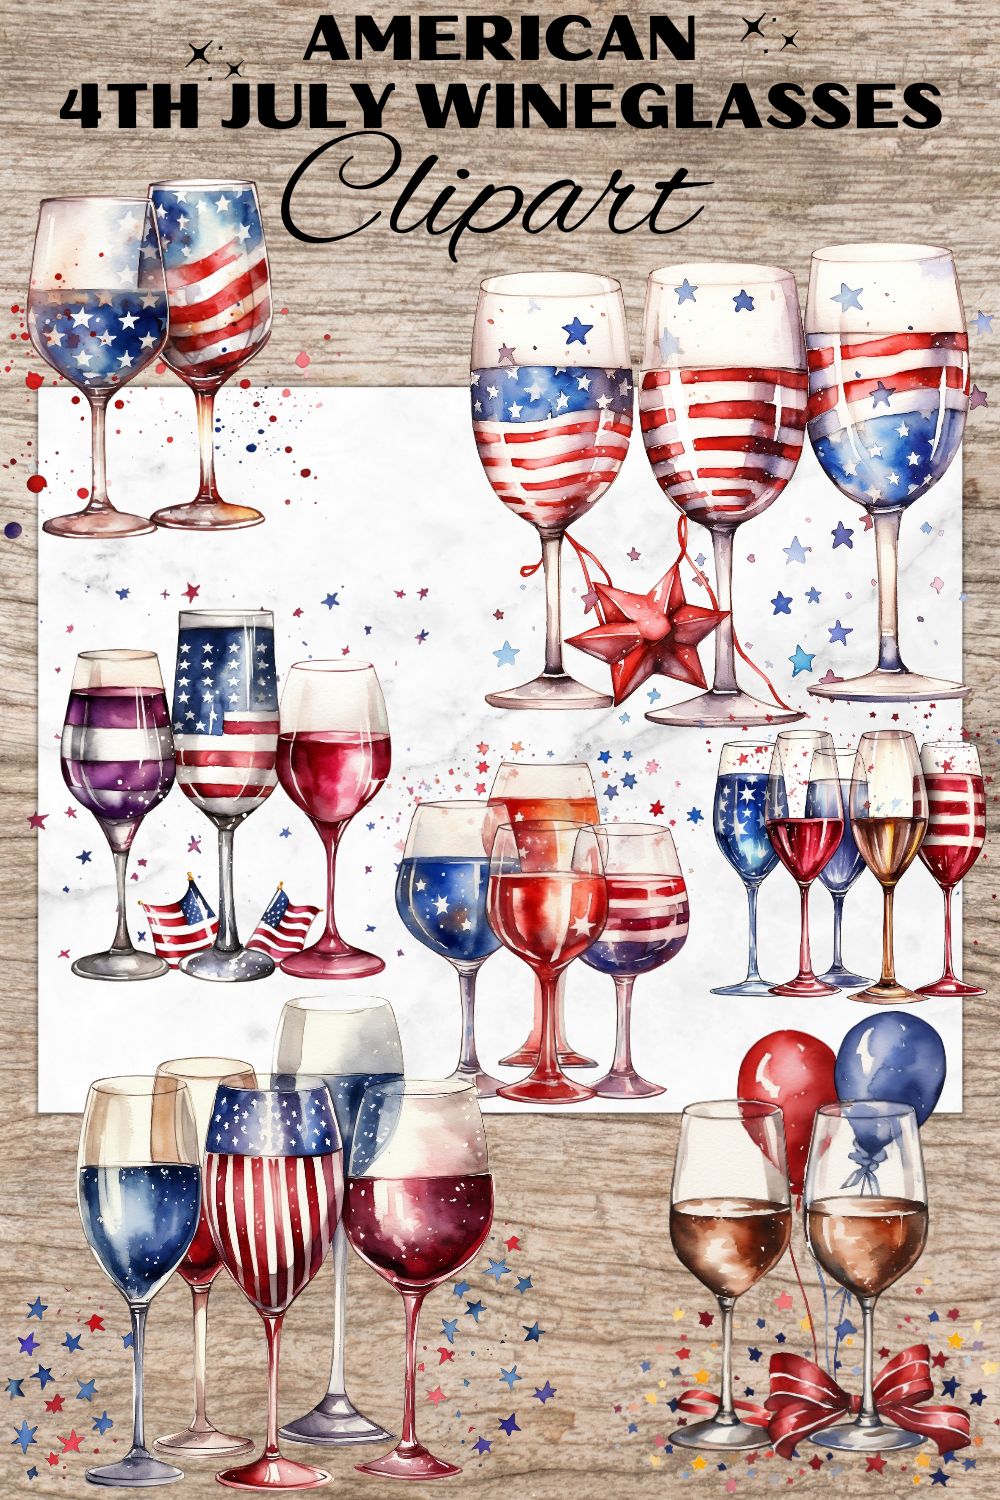 11 Watercolor American Wineglass PNG, Wineglass Clipart, Transparent, Digital Paper Craft, Illustrations, Watercolor Clipart for Scrapbook, Invitation, Wall Art, T-Shirt pinterest preview image.